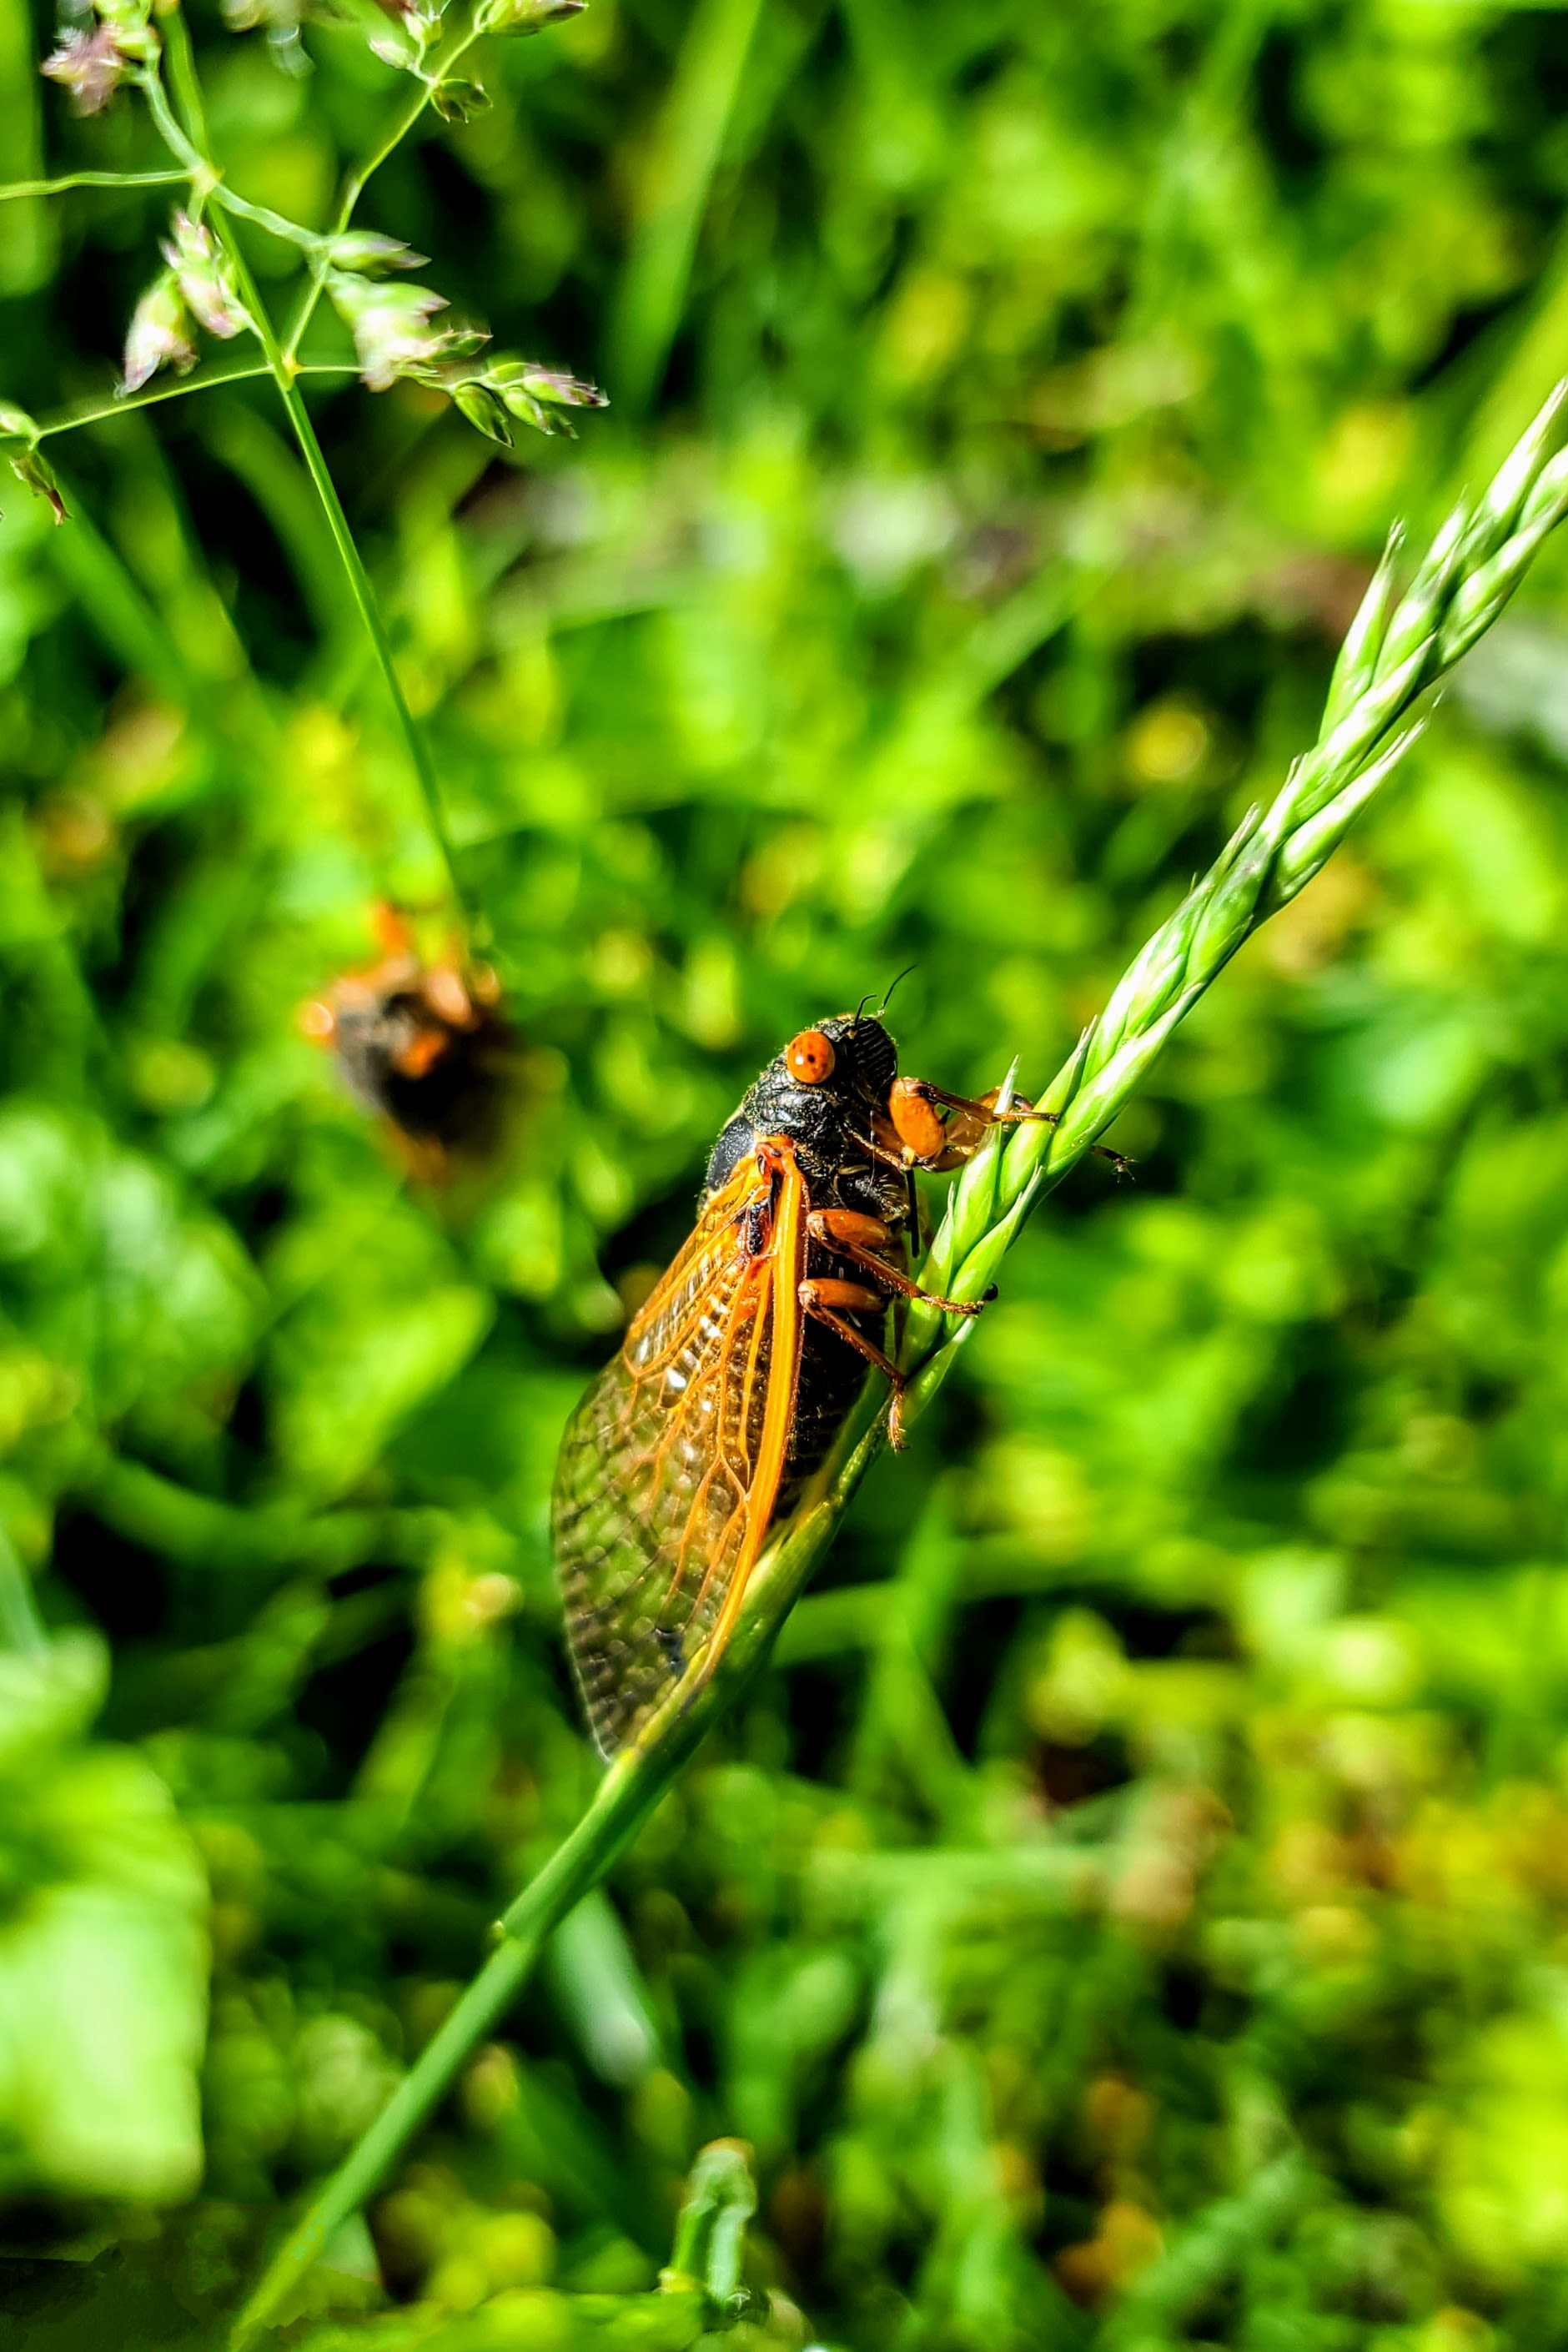 As cicadas emerge, nature lovers travel thousands of miles to converge on Illinois